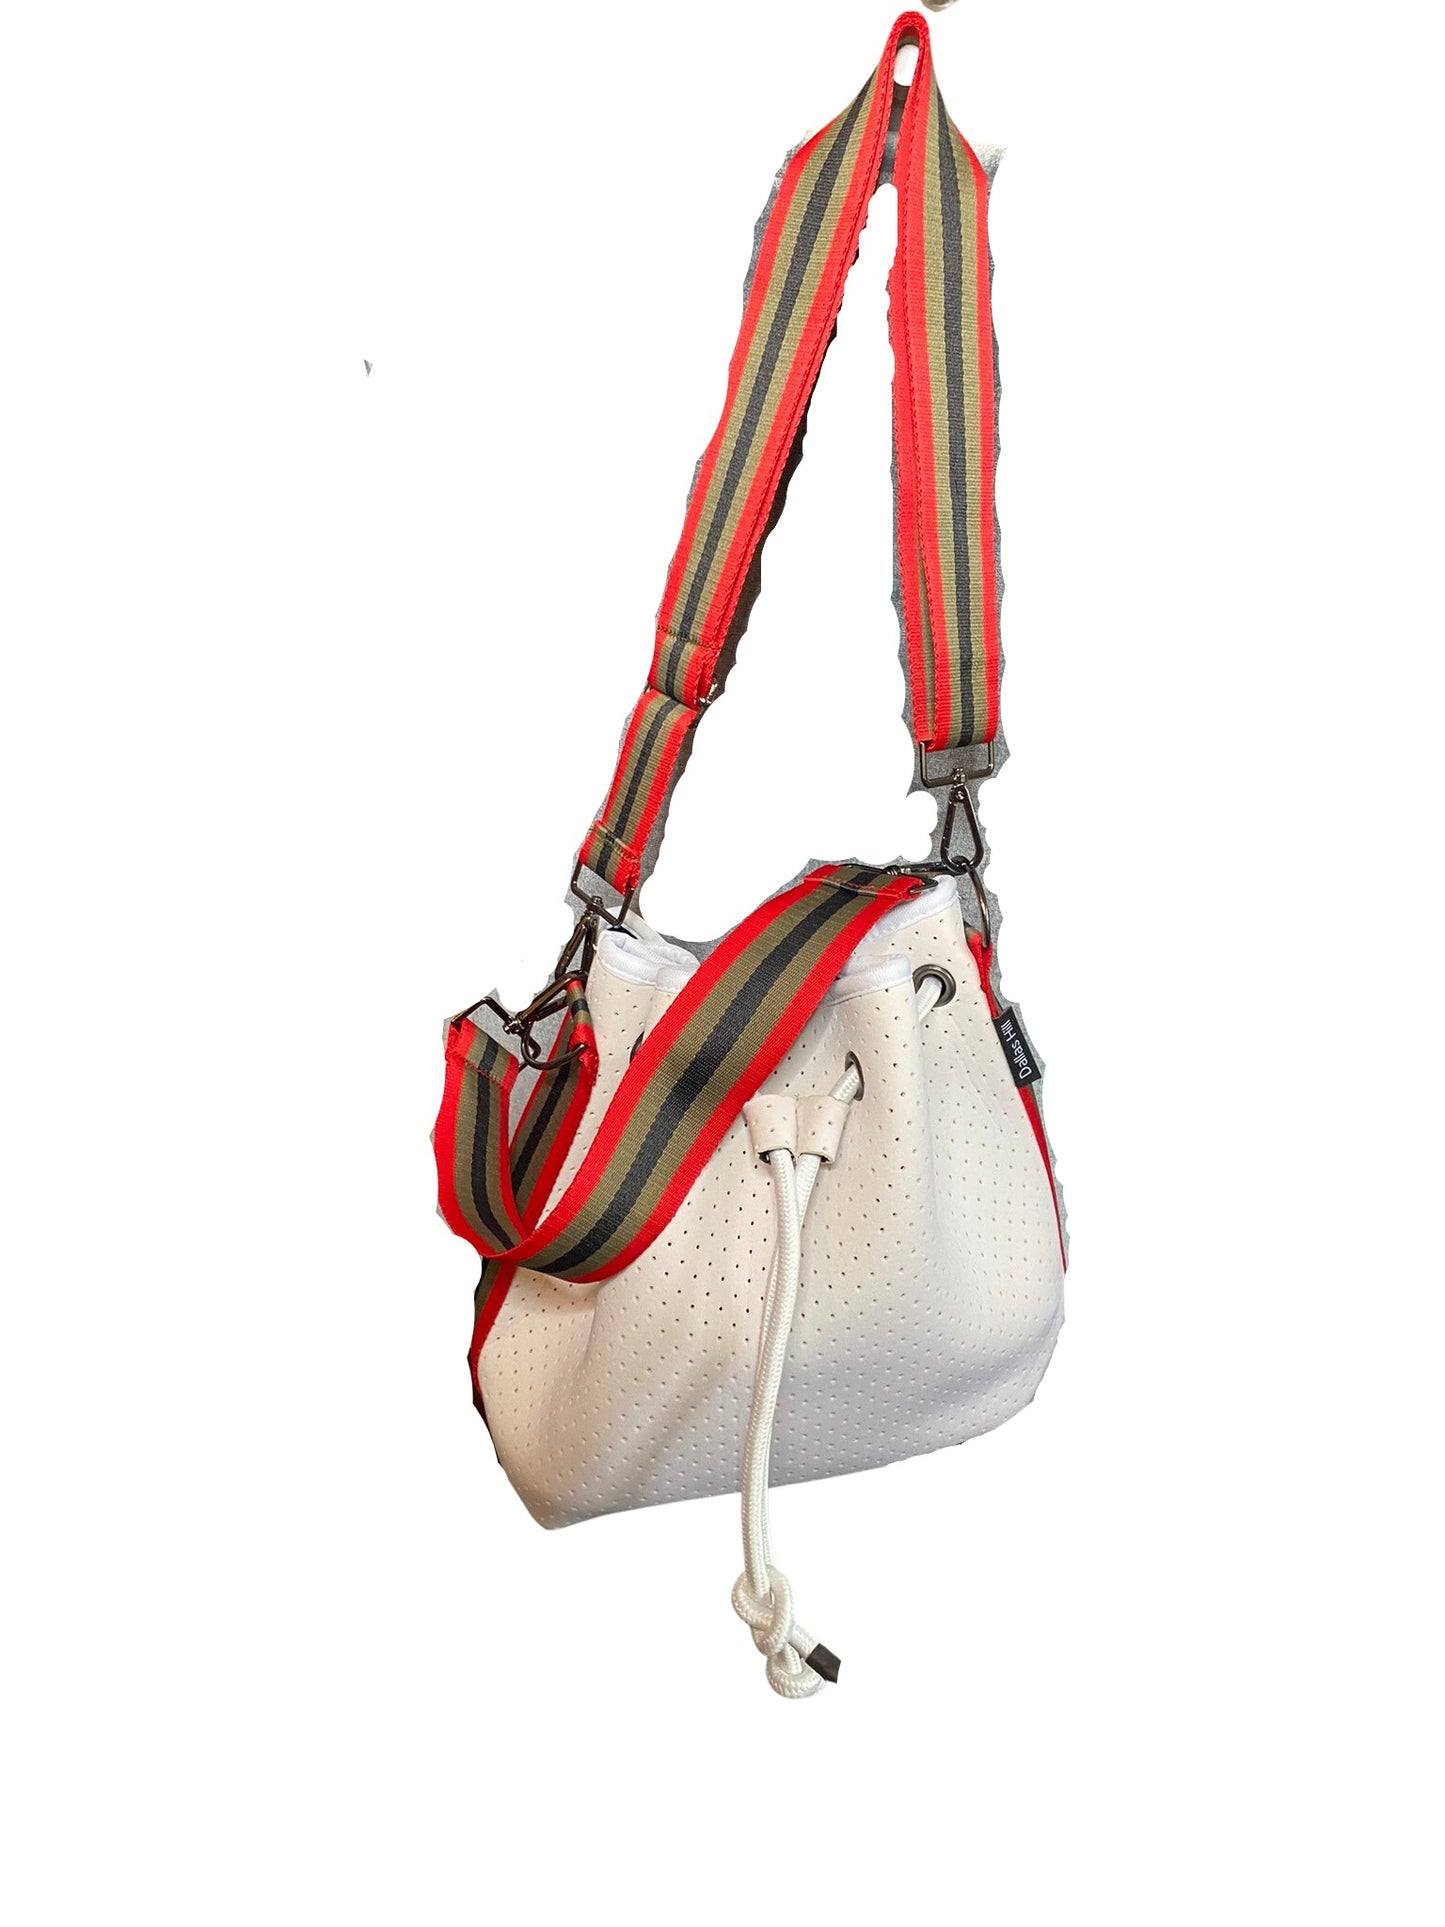 Crossbody Bucket Neoprene Purse White includes Two Straps & Extra Pouch